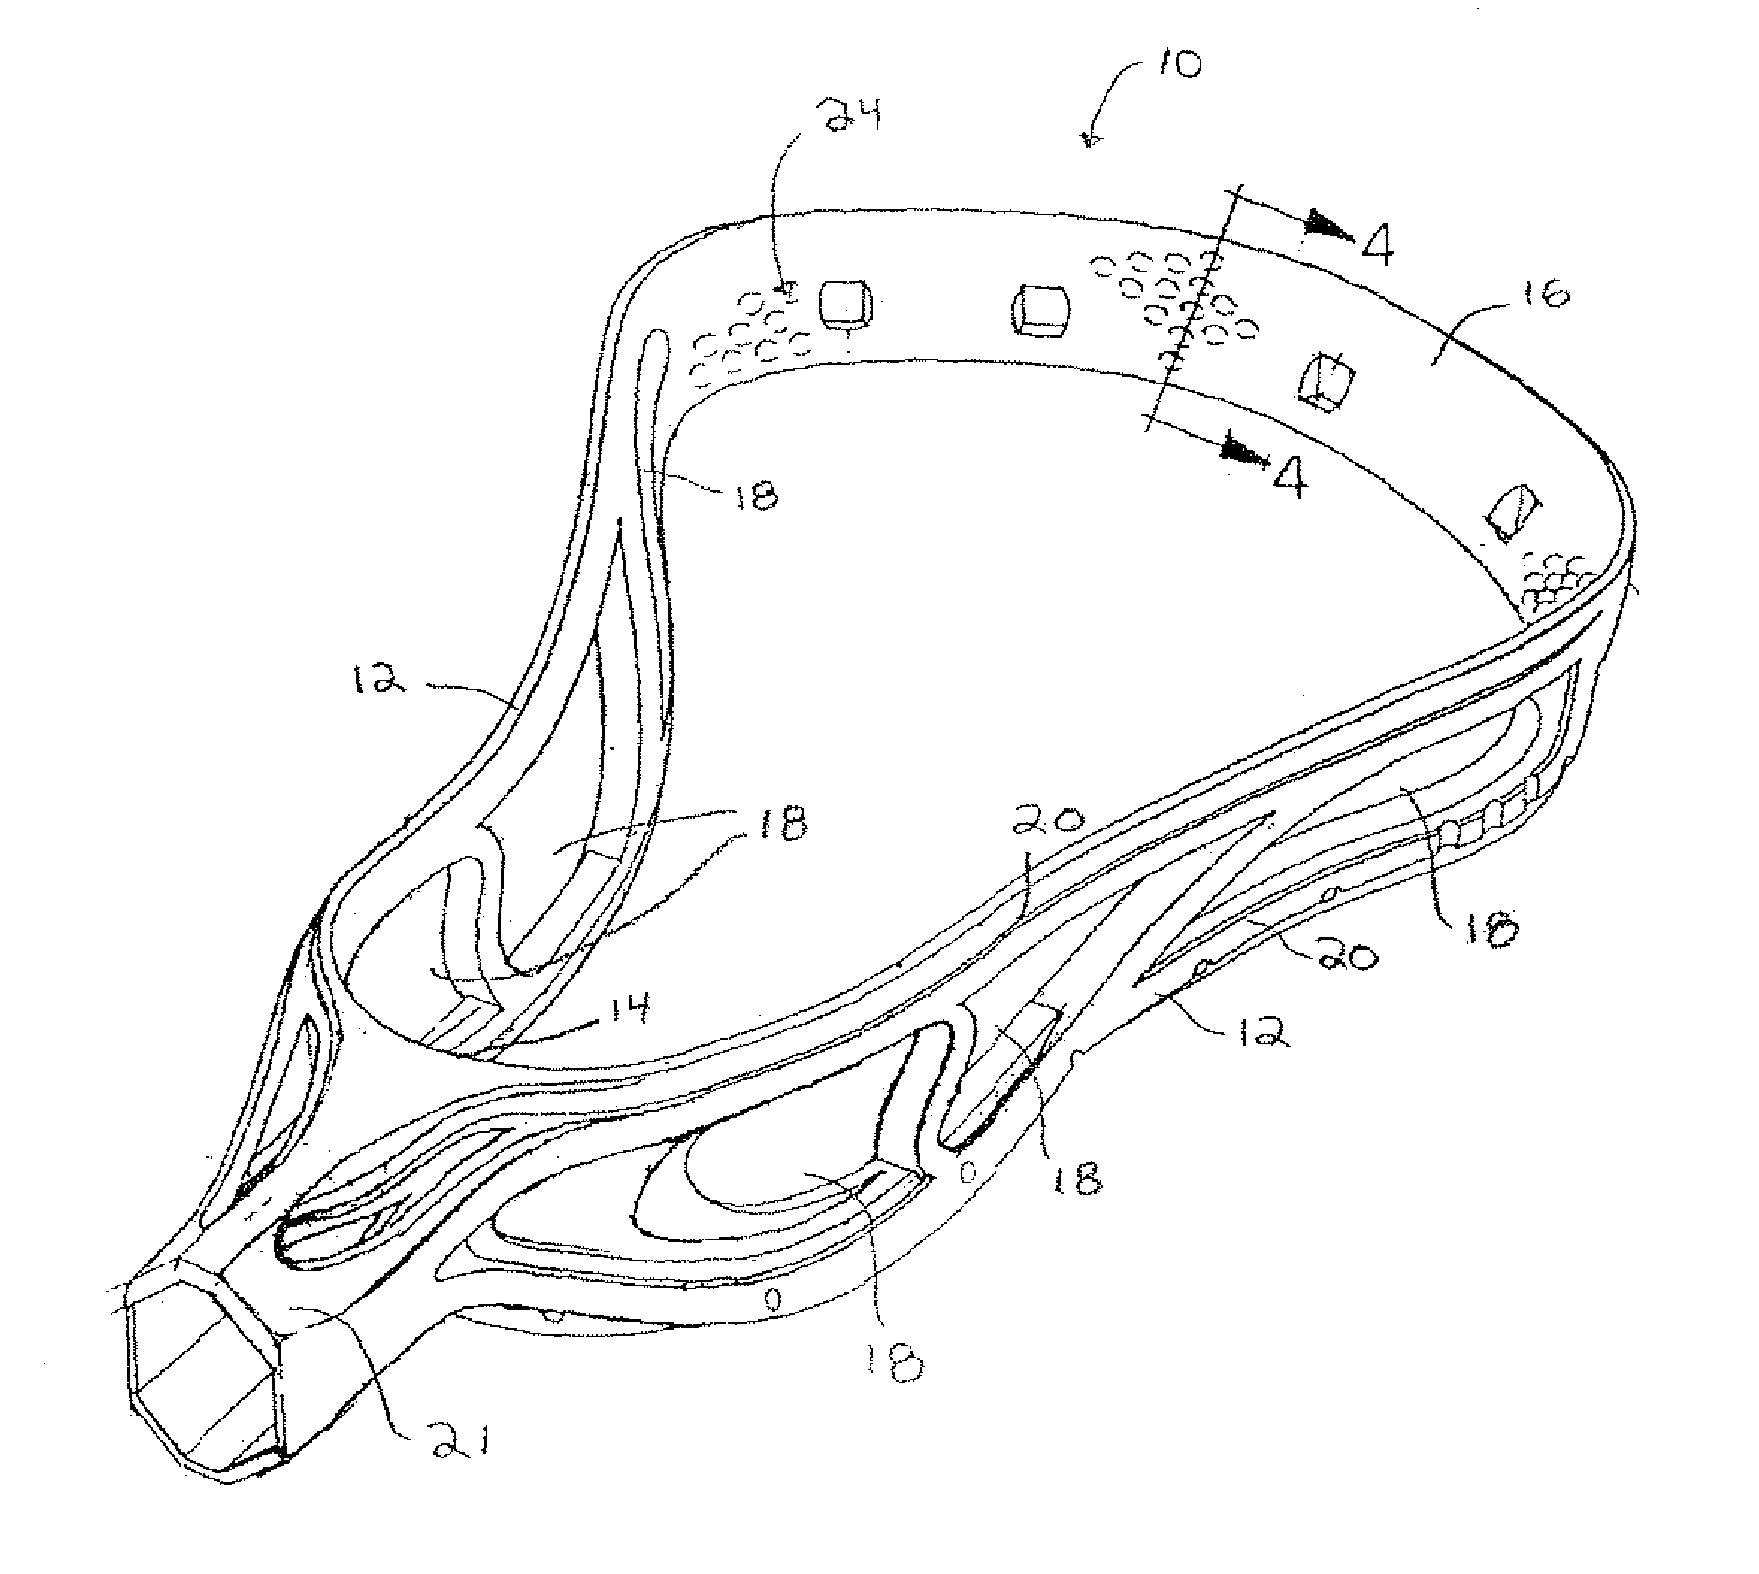 Lacrosse head and method of forming same